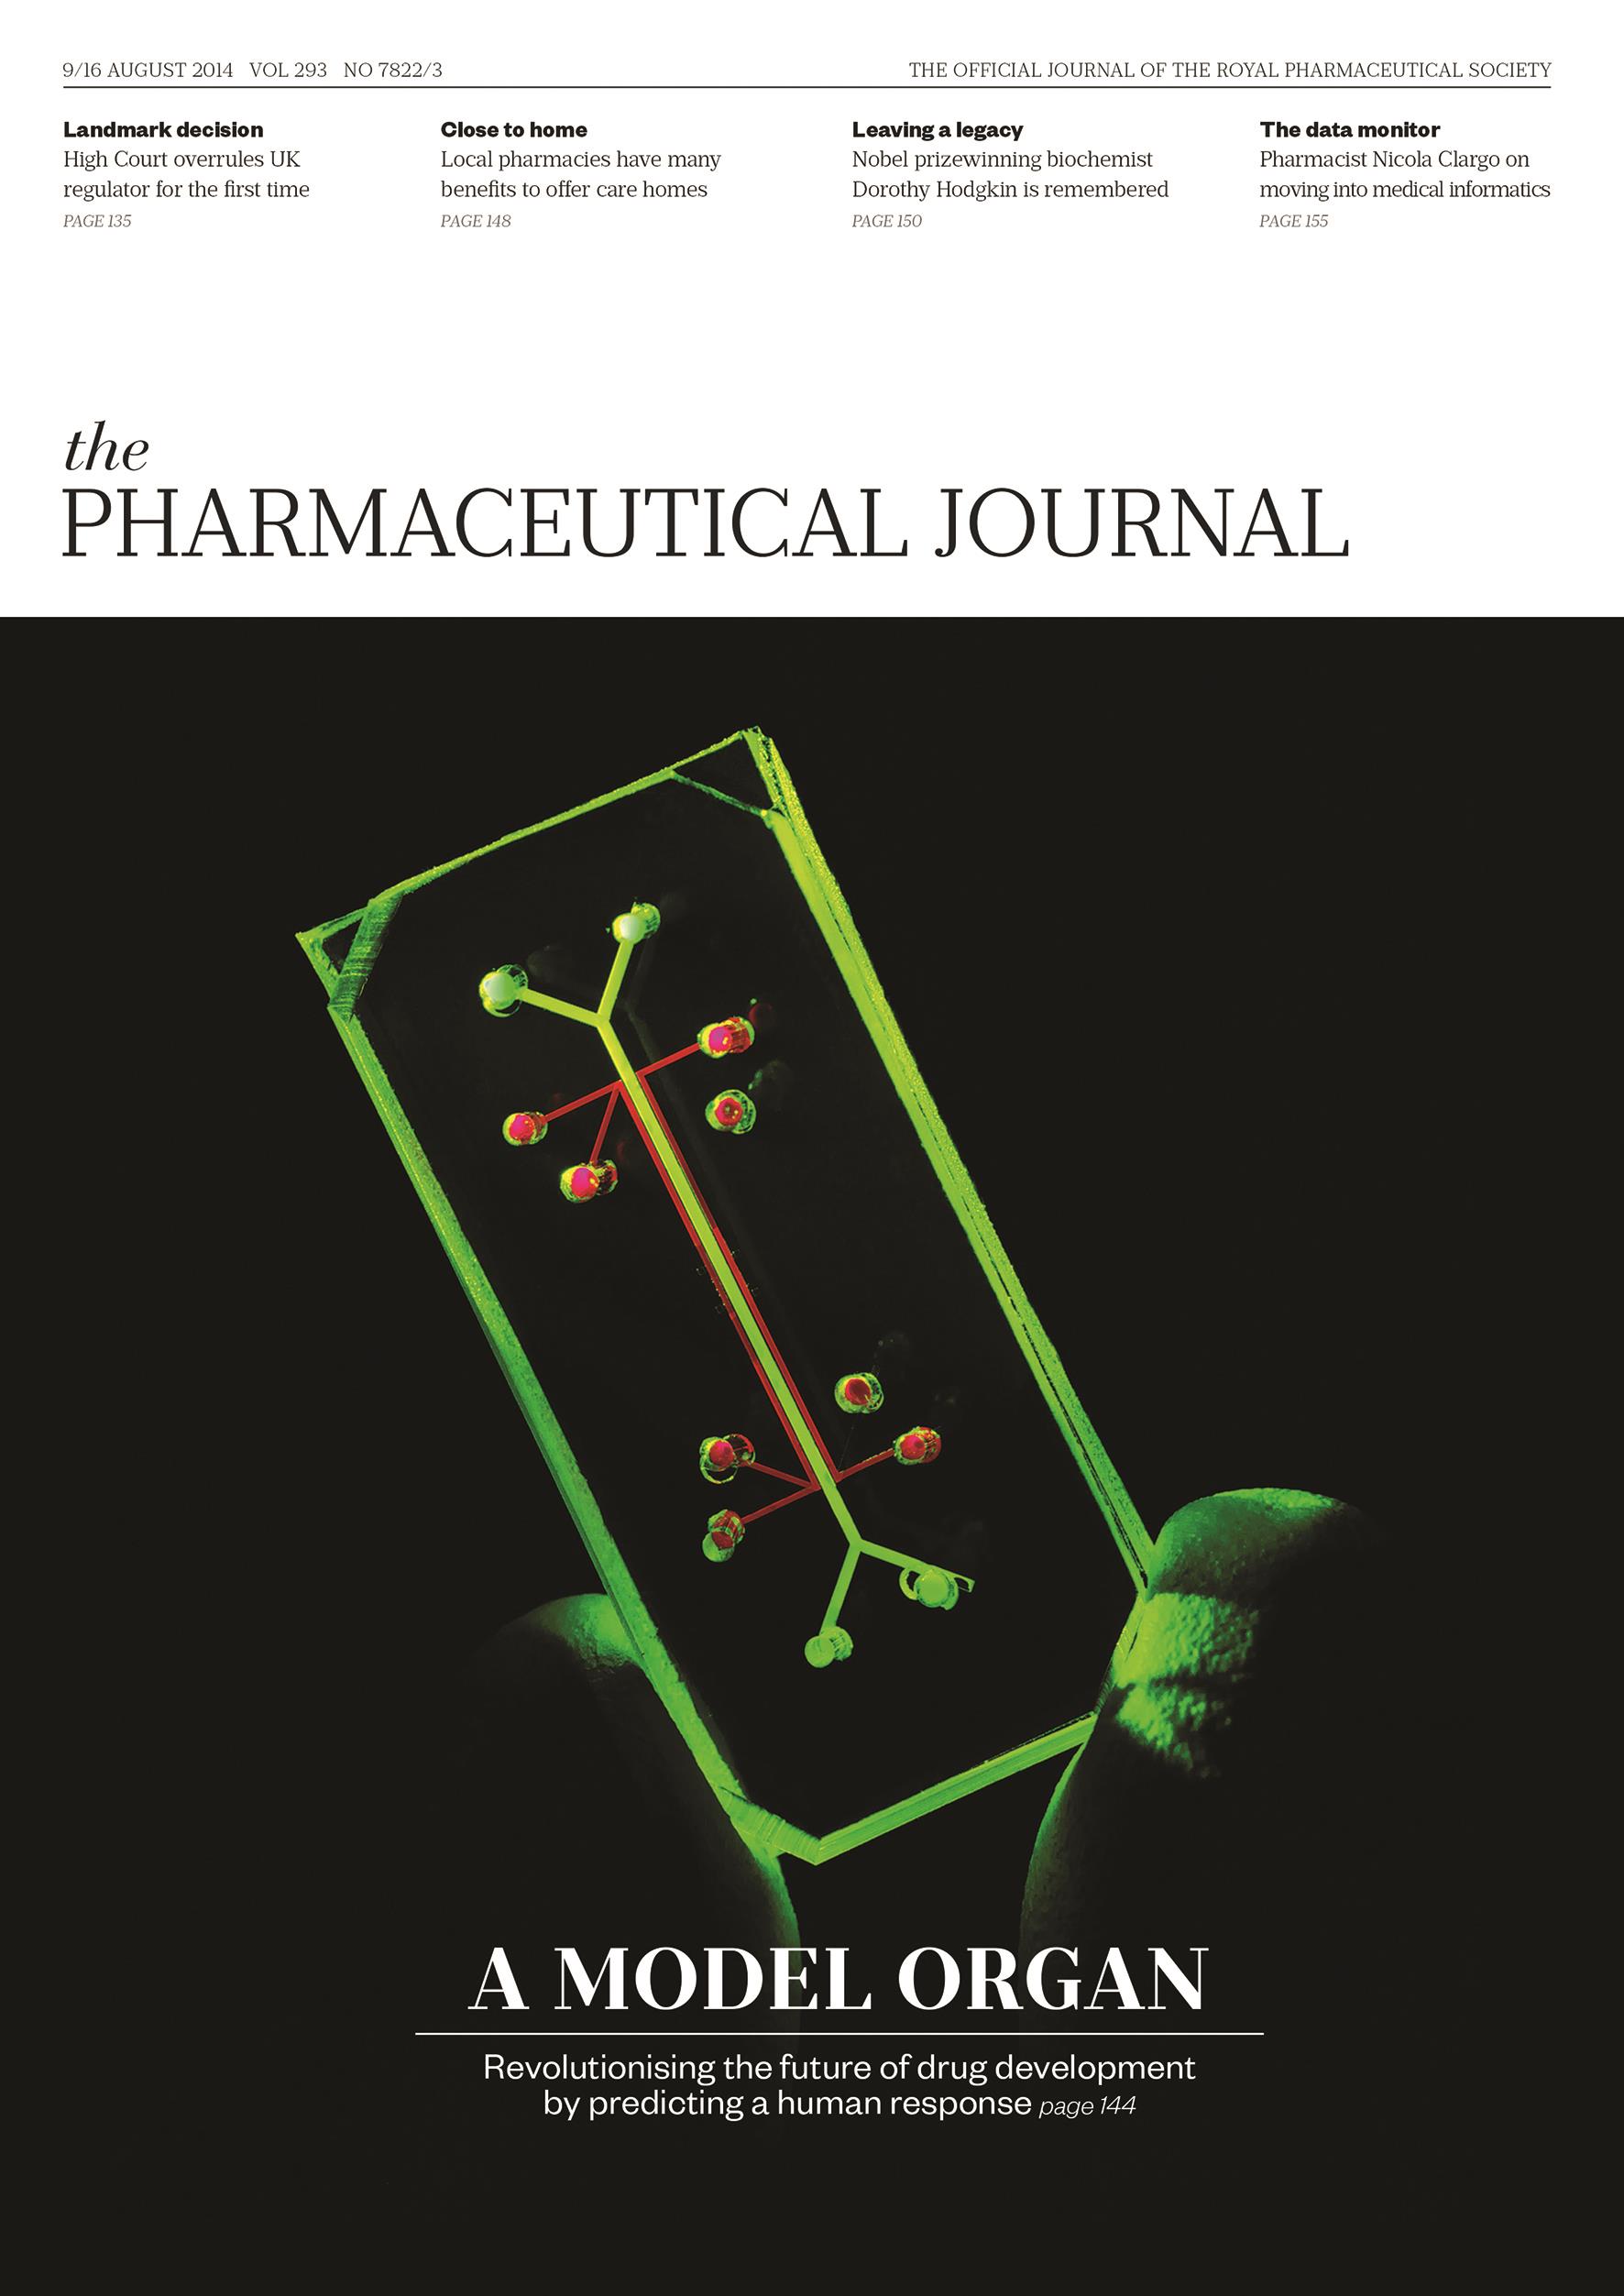 Publication issue cover for PJ, 9/16 August 2014, Vol 293, No 7822/3